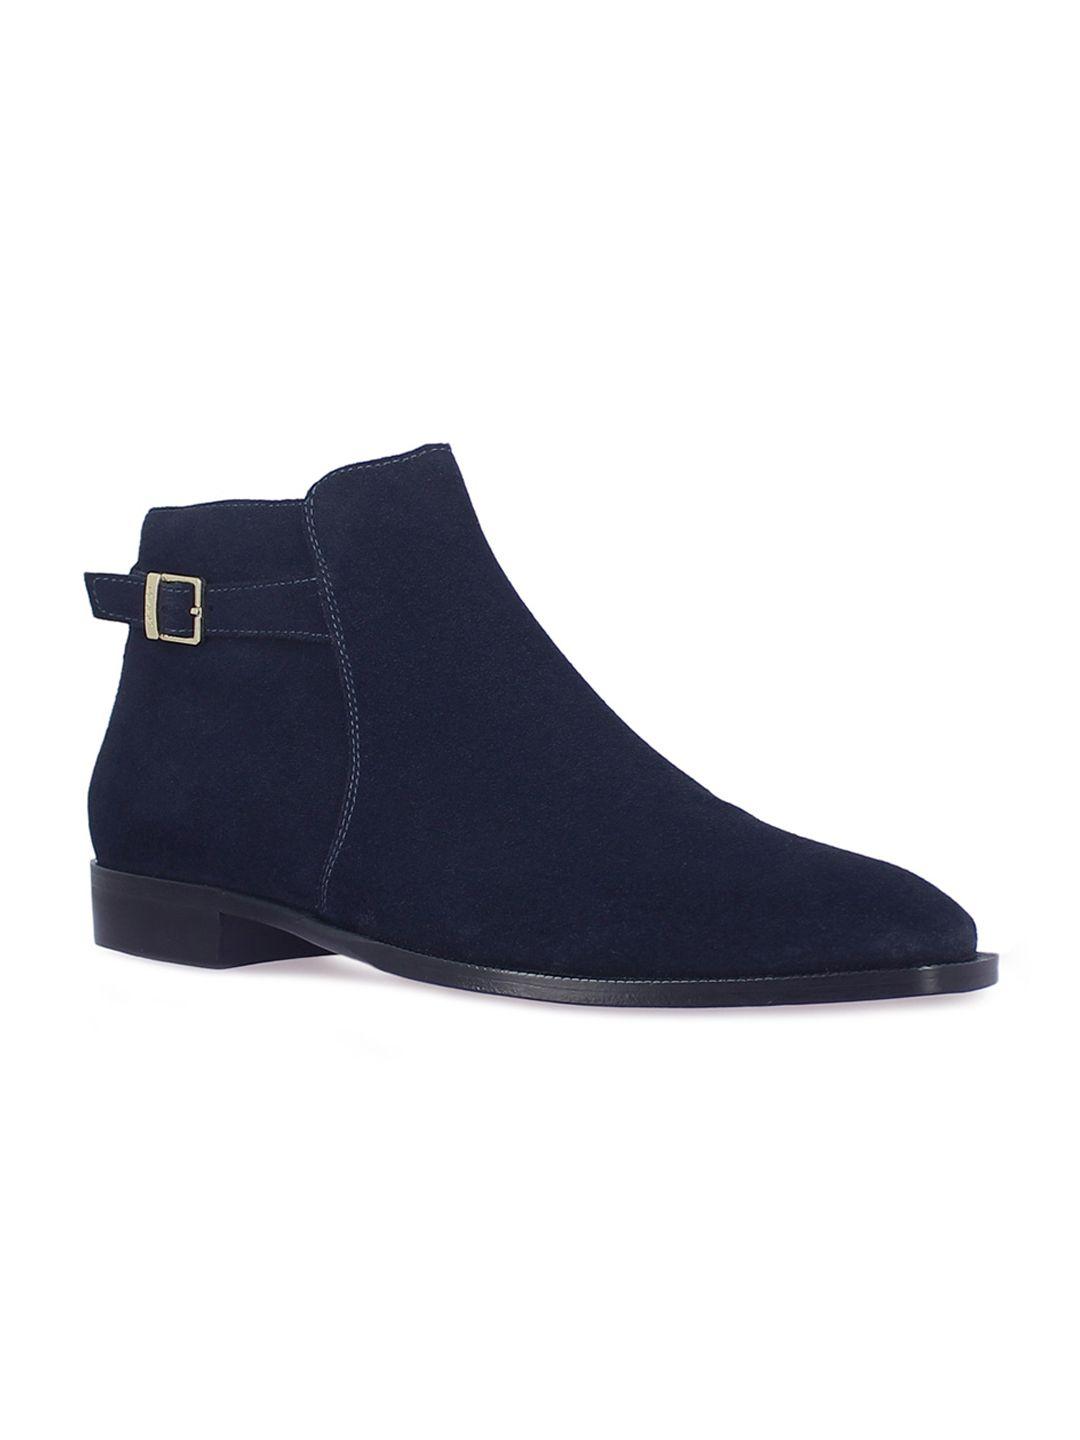 saint g men navy blue suede leather ankle boot